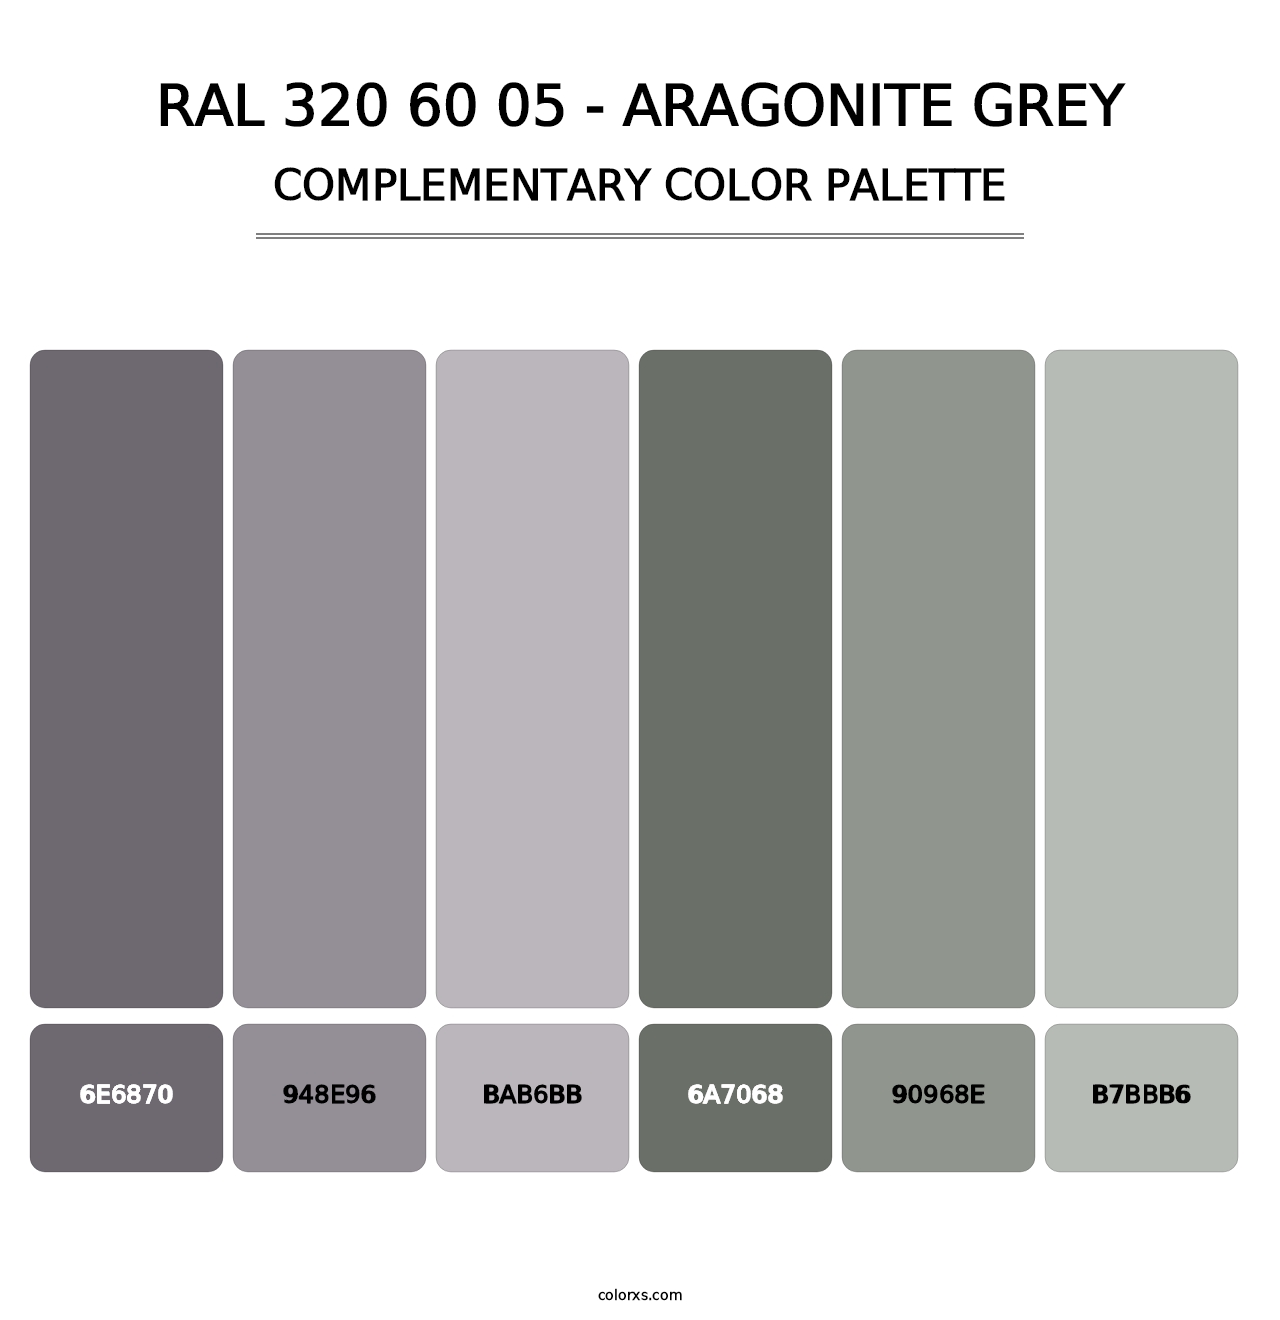 RAL 320 60 05 - Aragonite Grey - Complementary Color Palette